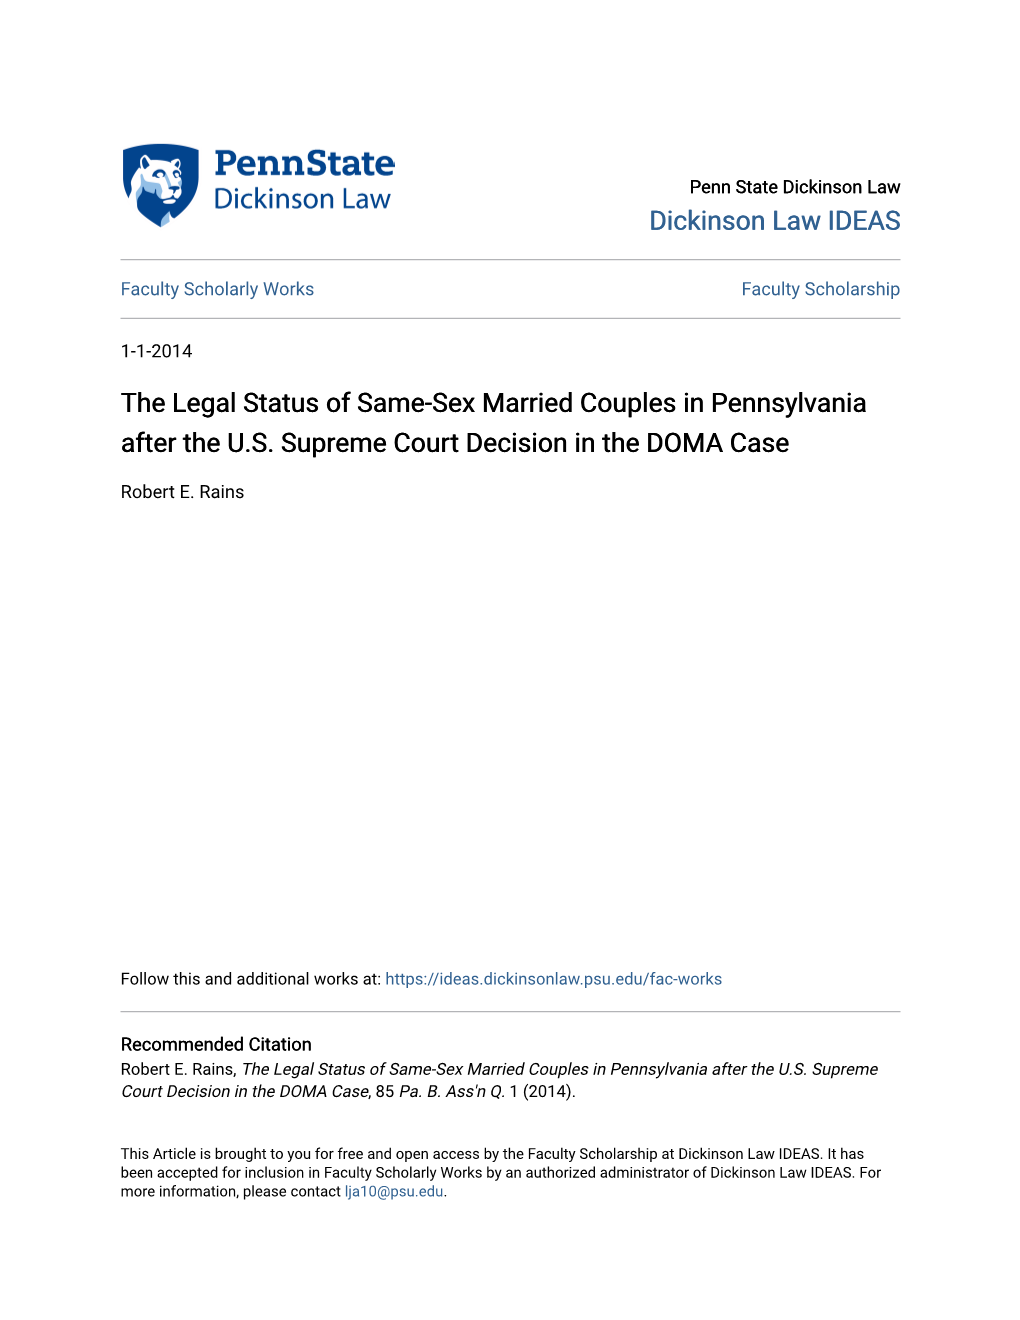 The Legal Status of Same-Sex Married Couples in Pennsylvania After the U.S